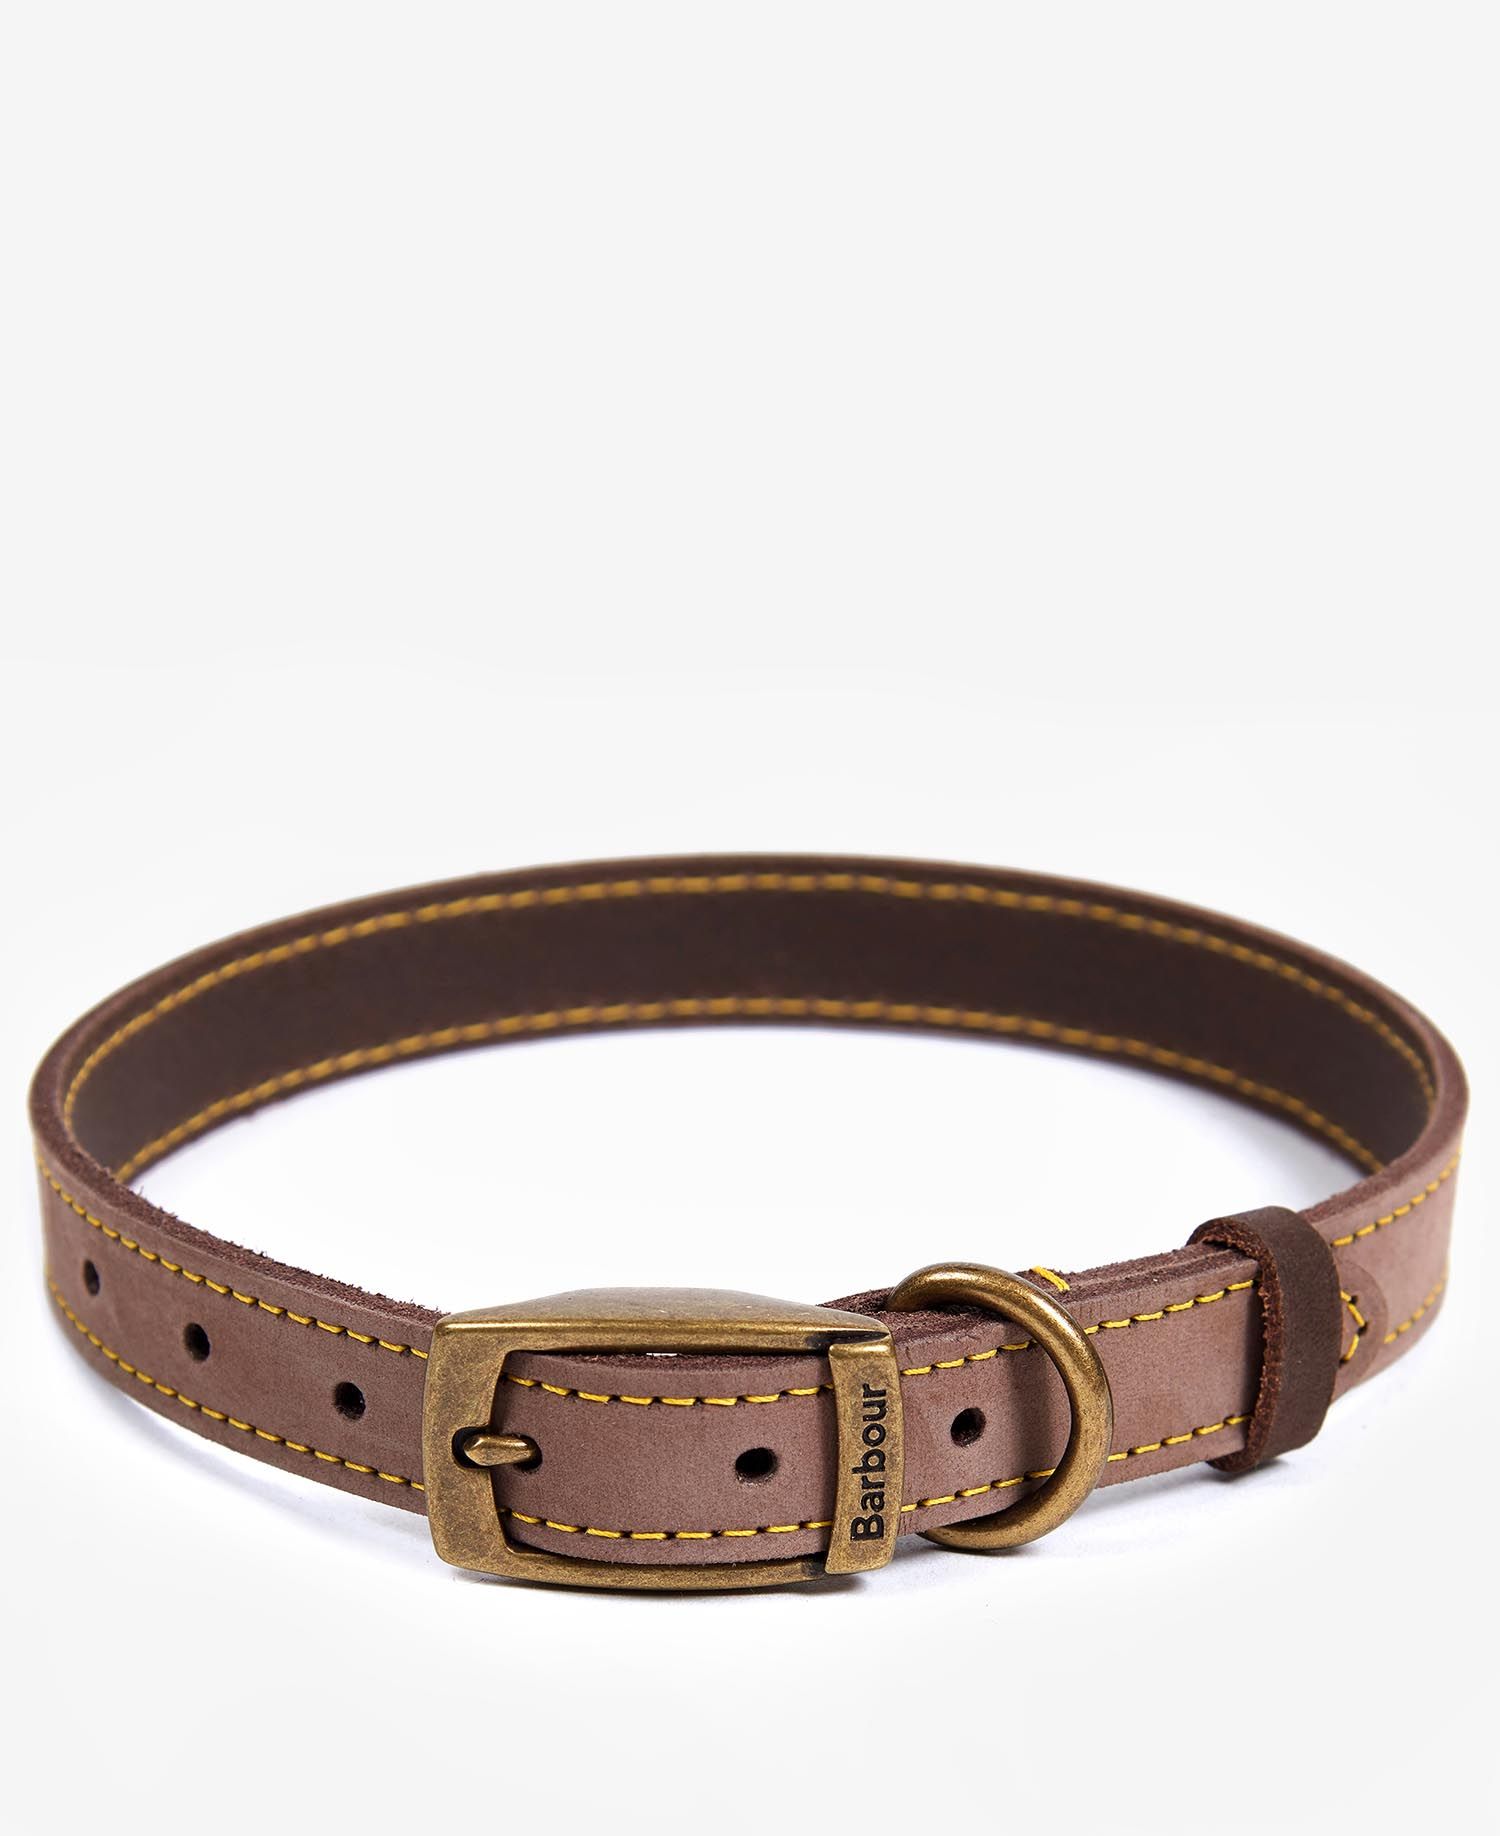 Barbour Leather Dog Collar in Brown | Barbour | Barbour